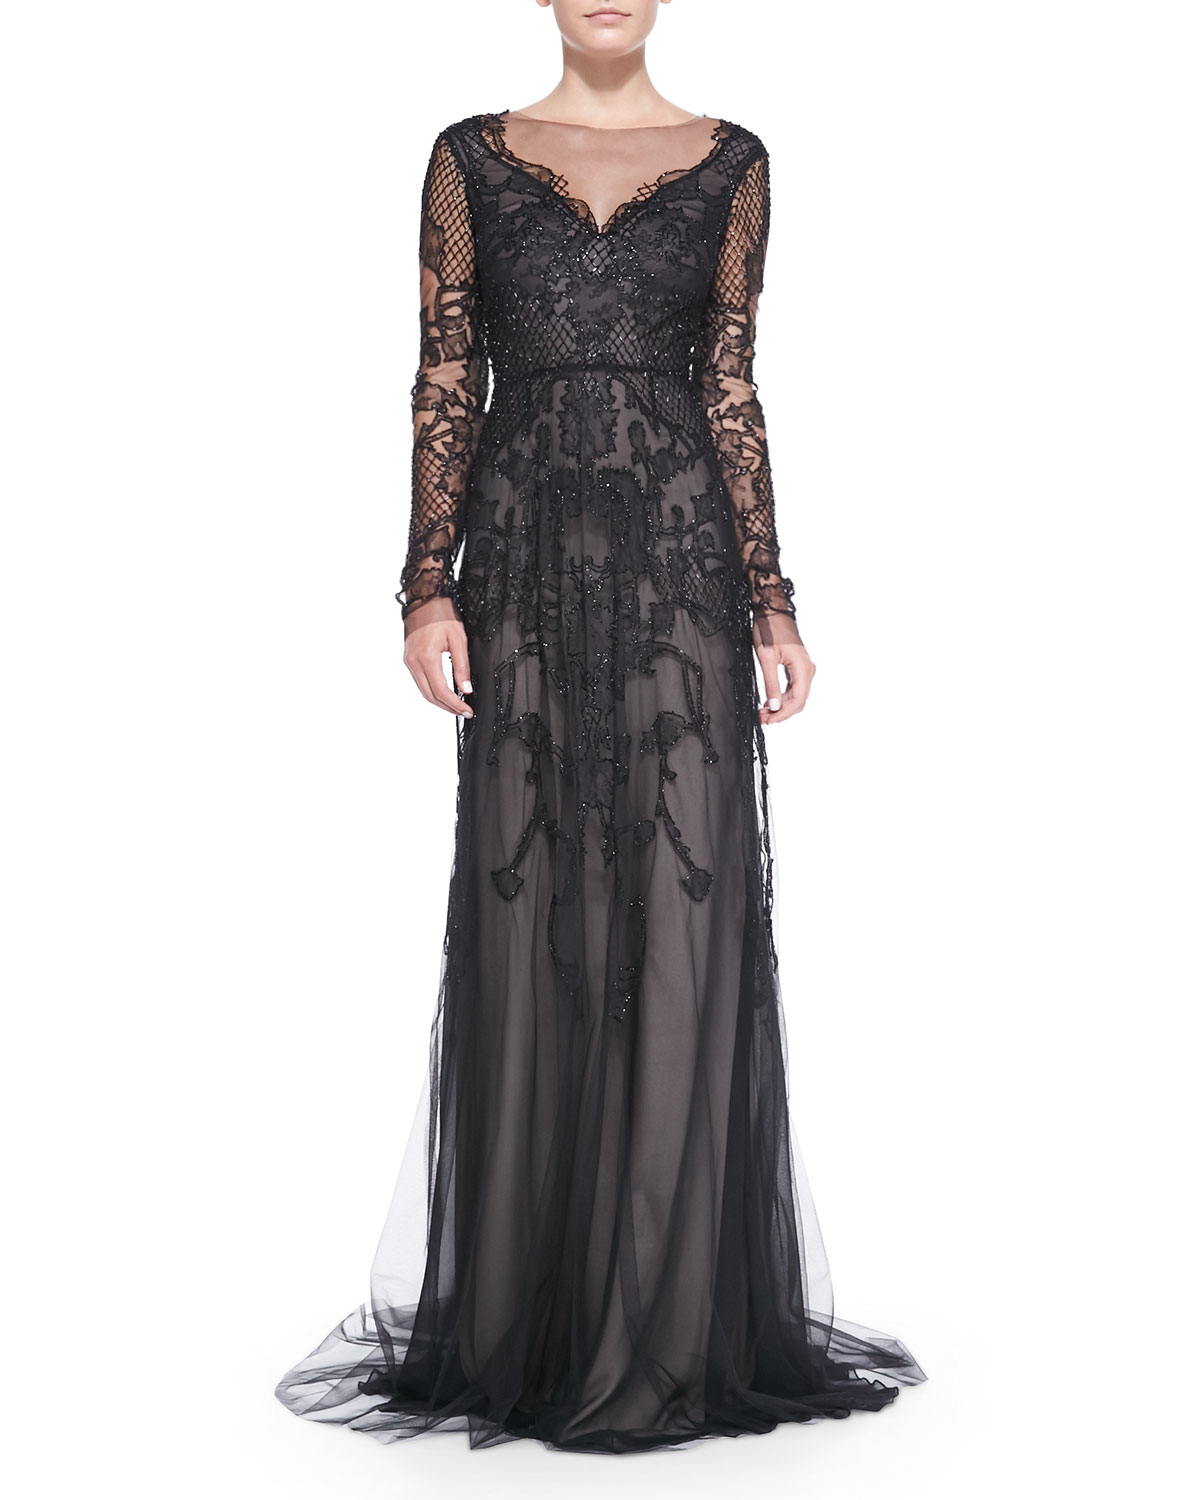 Lyst - Monique lhuillier Long-sleeve Embroidered Lace Gown in Black